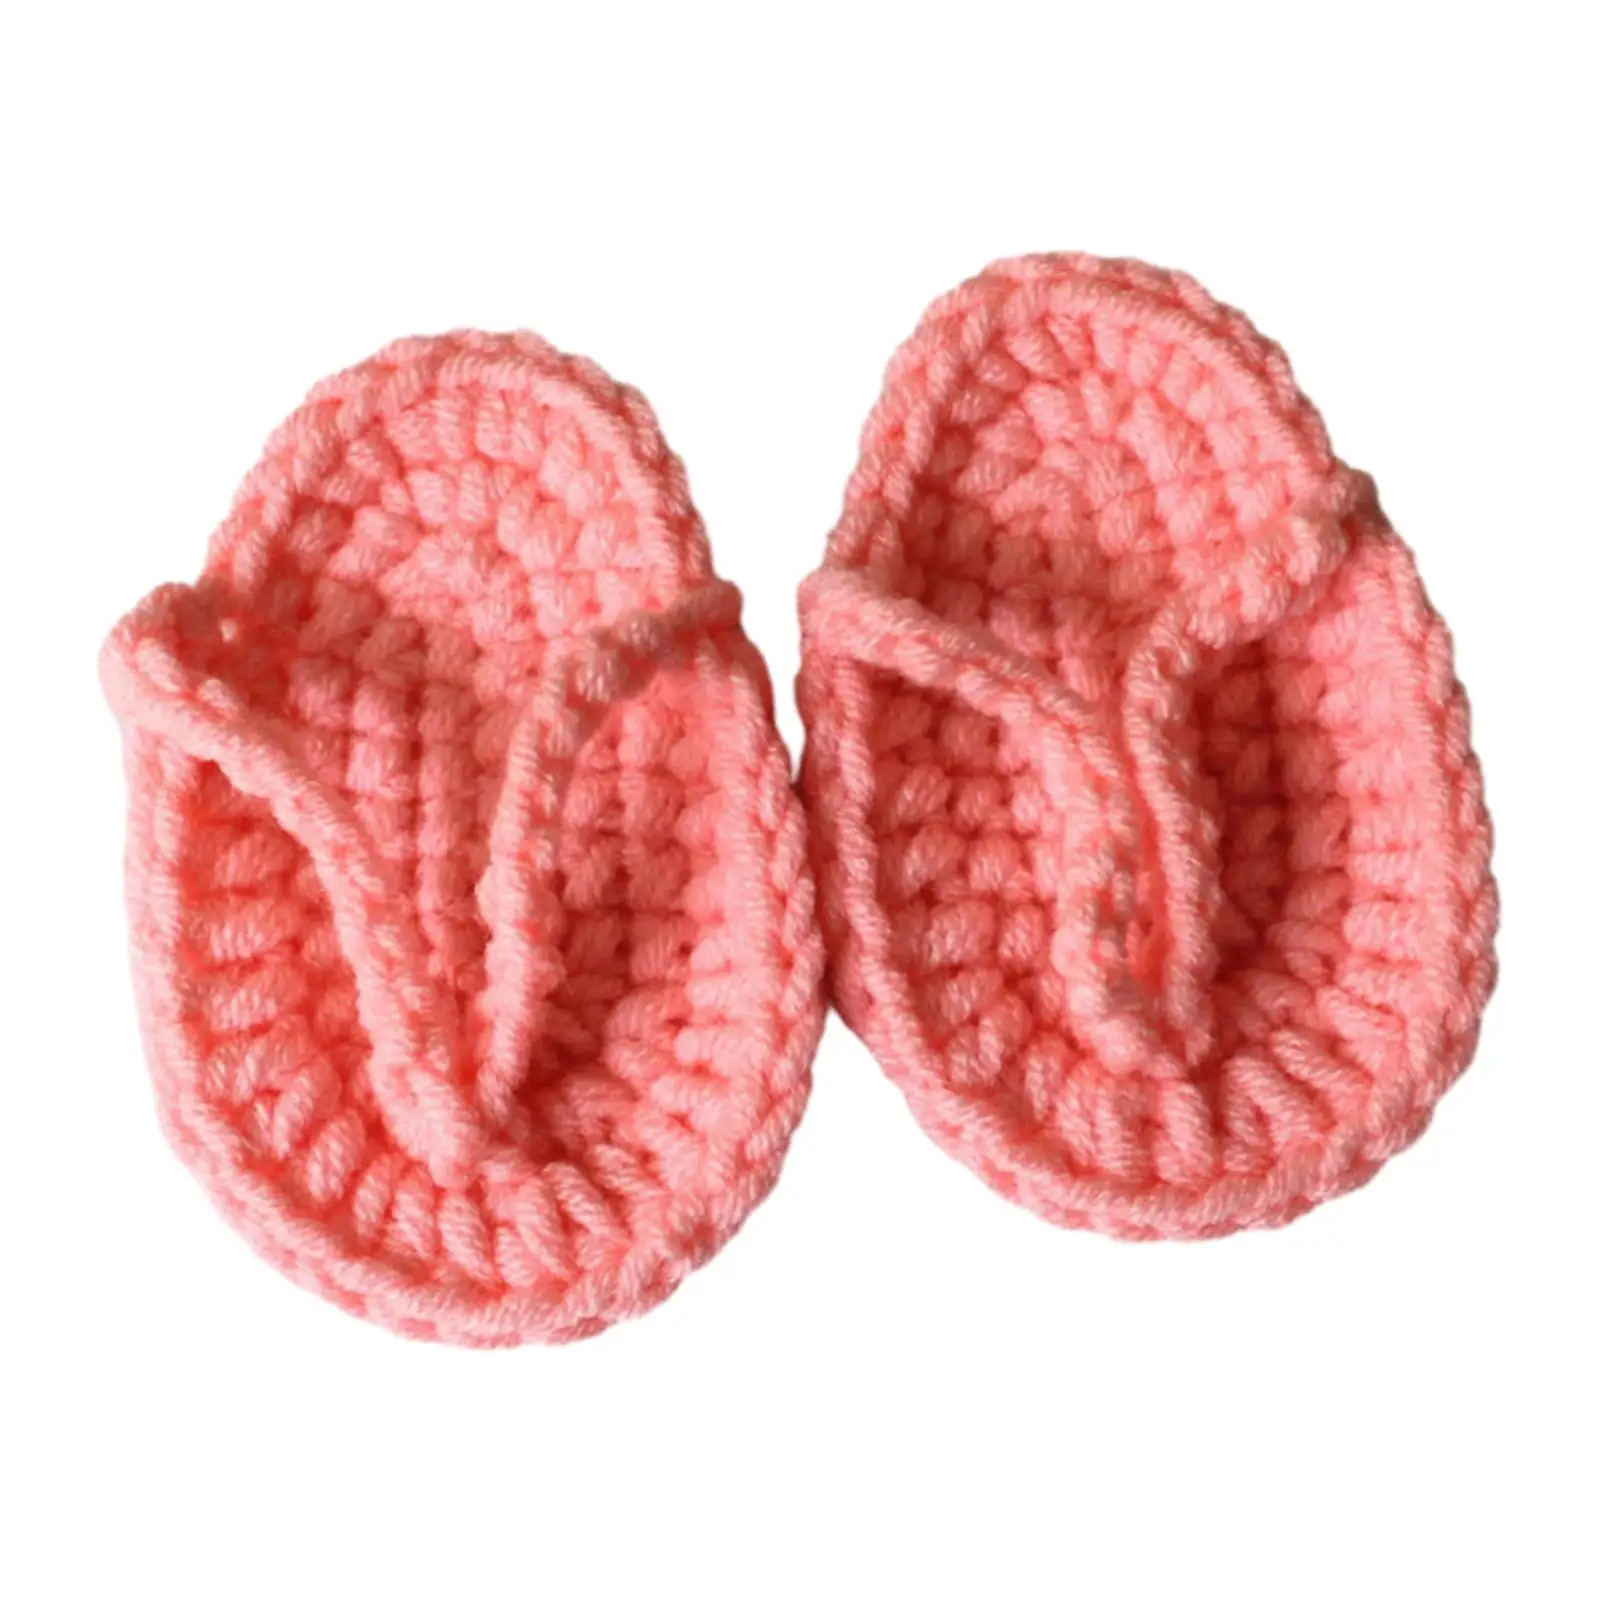 Infant Slippers Newborn Props 2.75inch Skin Friendly Shoes for Newborn Infant Baby Baby Photo Props Children`s Shoes Mini 1 Pair